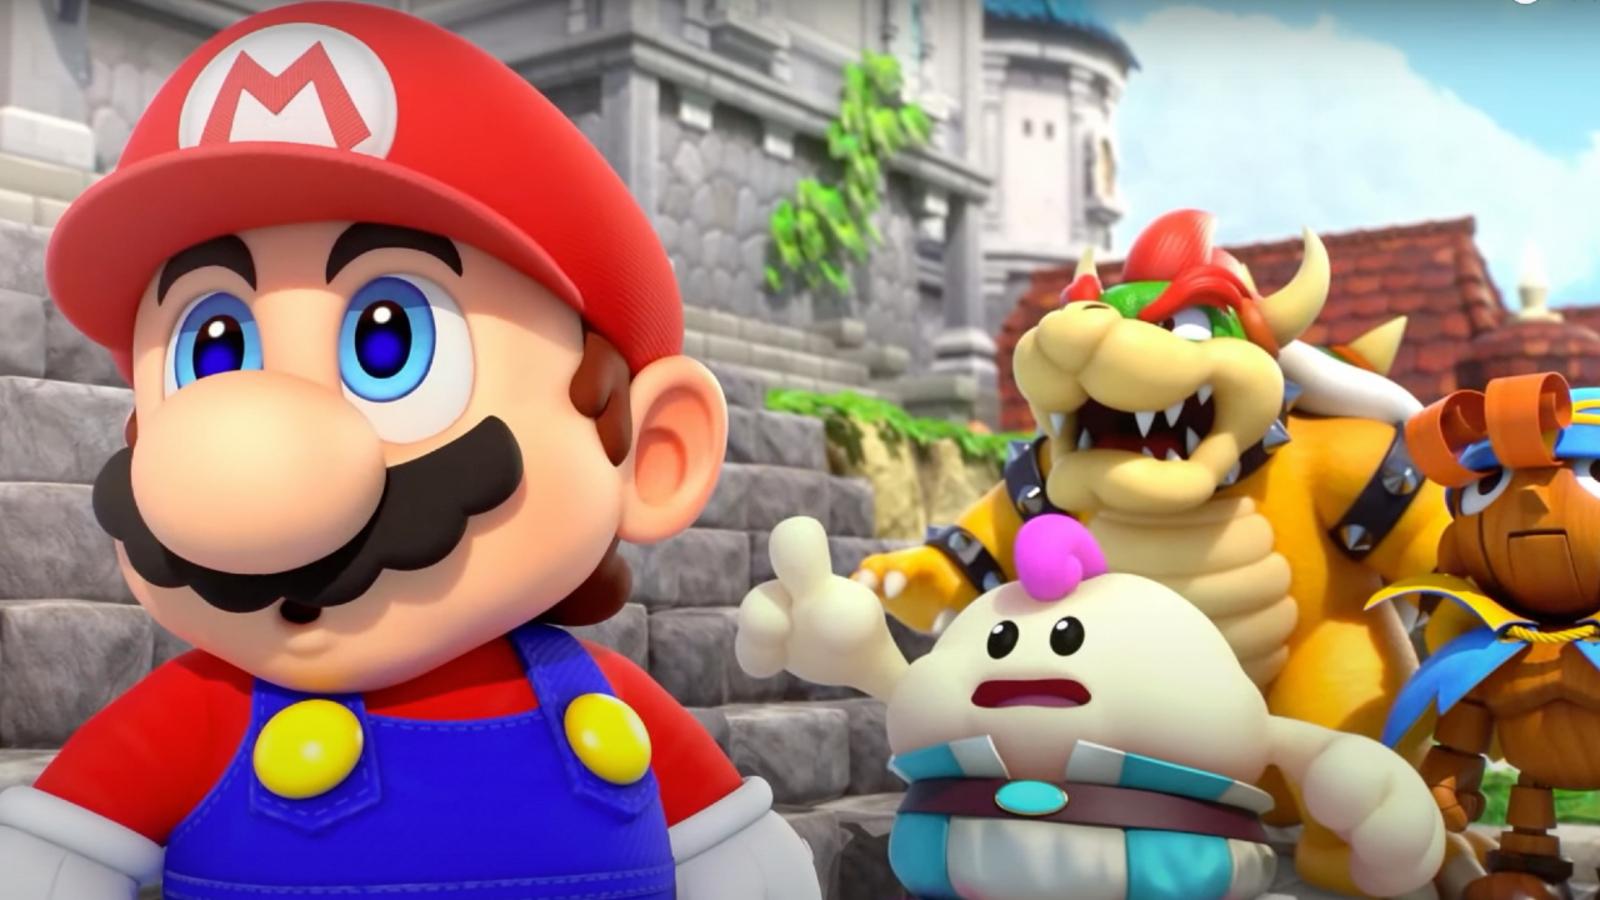 Super Mario RPG: Release date, trailers & everything we know - Dexerto